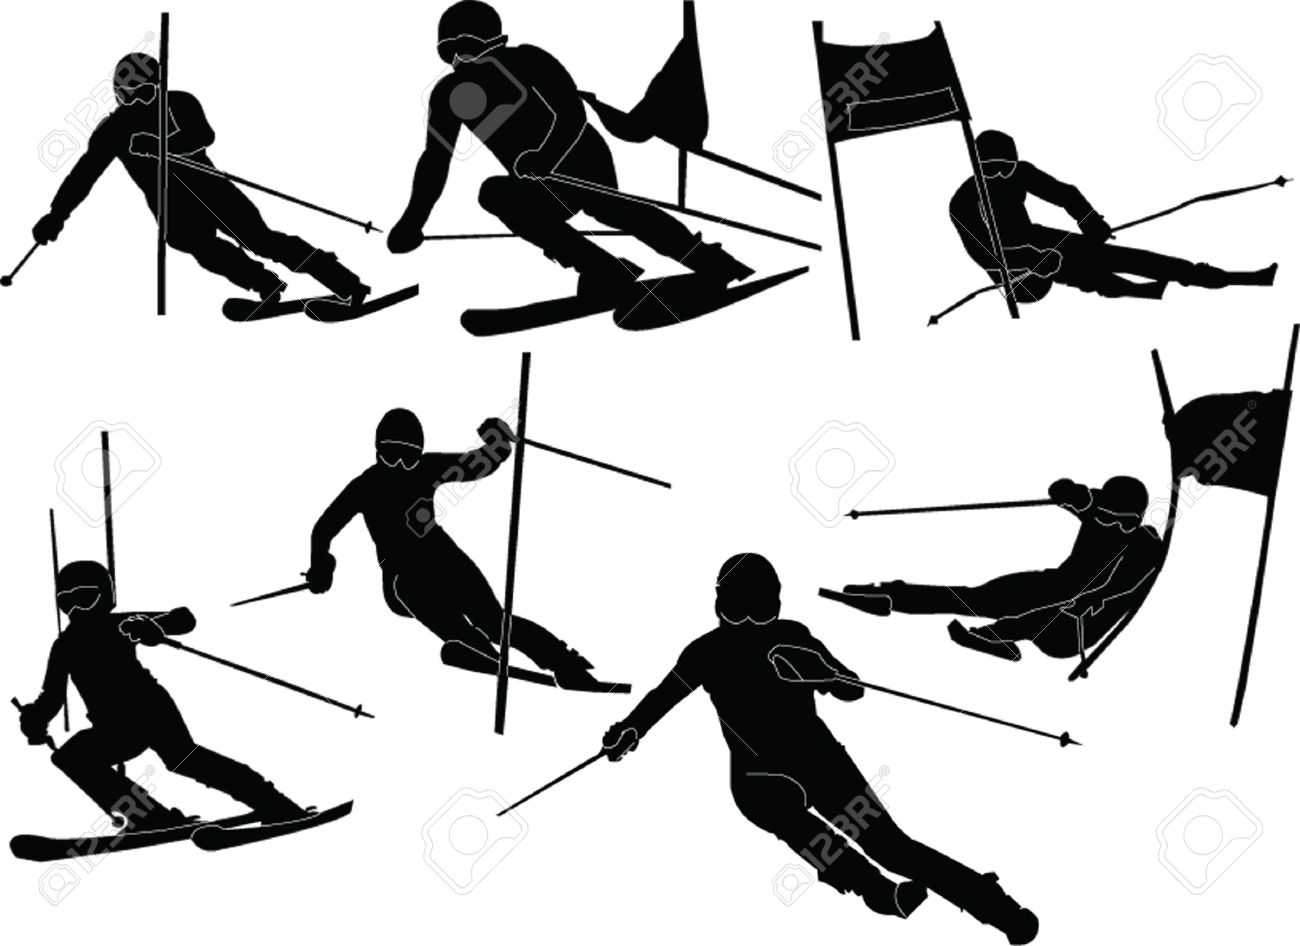 215 Skier free clipart.